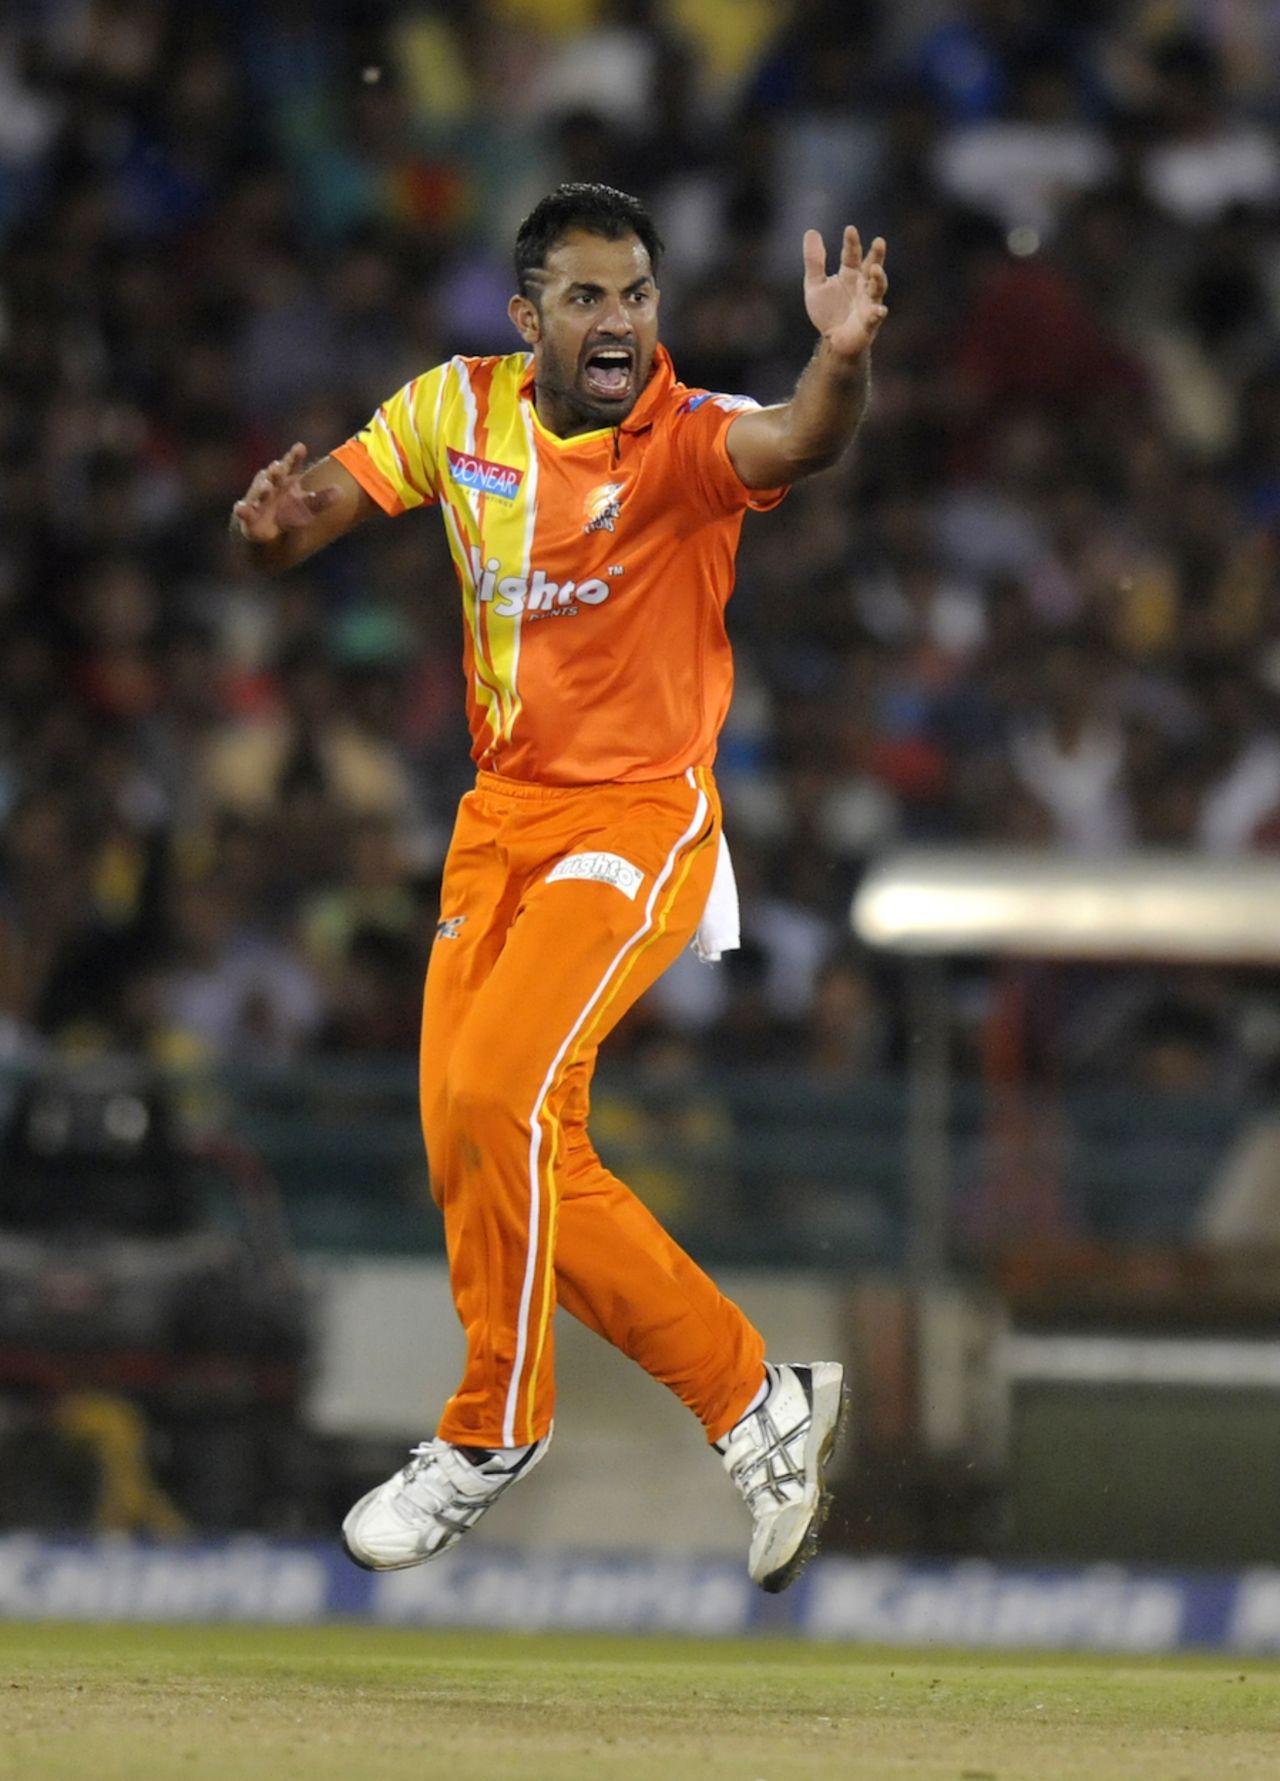 Wahab Riaz picked up two wickets, Mumbai Indians v Lahore Lions, CLT20 qualifier, Raipur, September 13, 2014